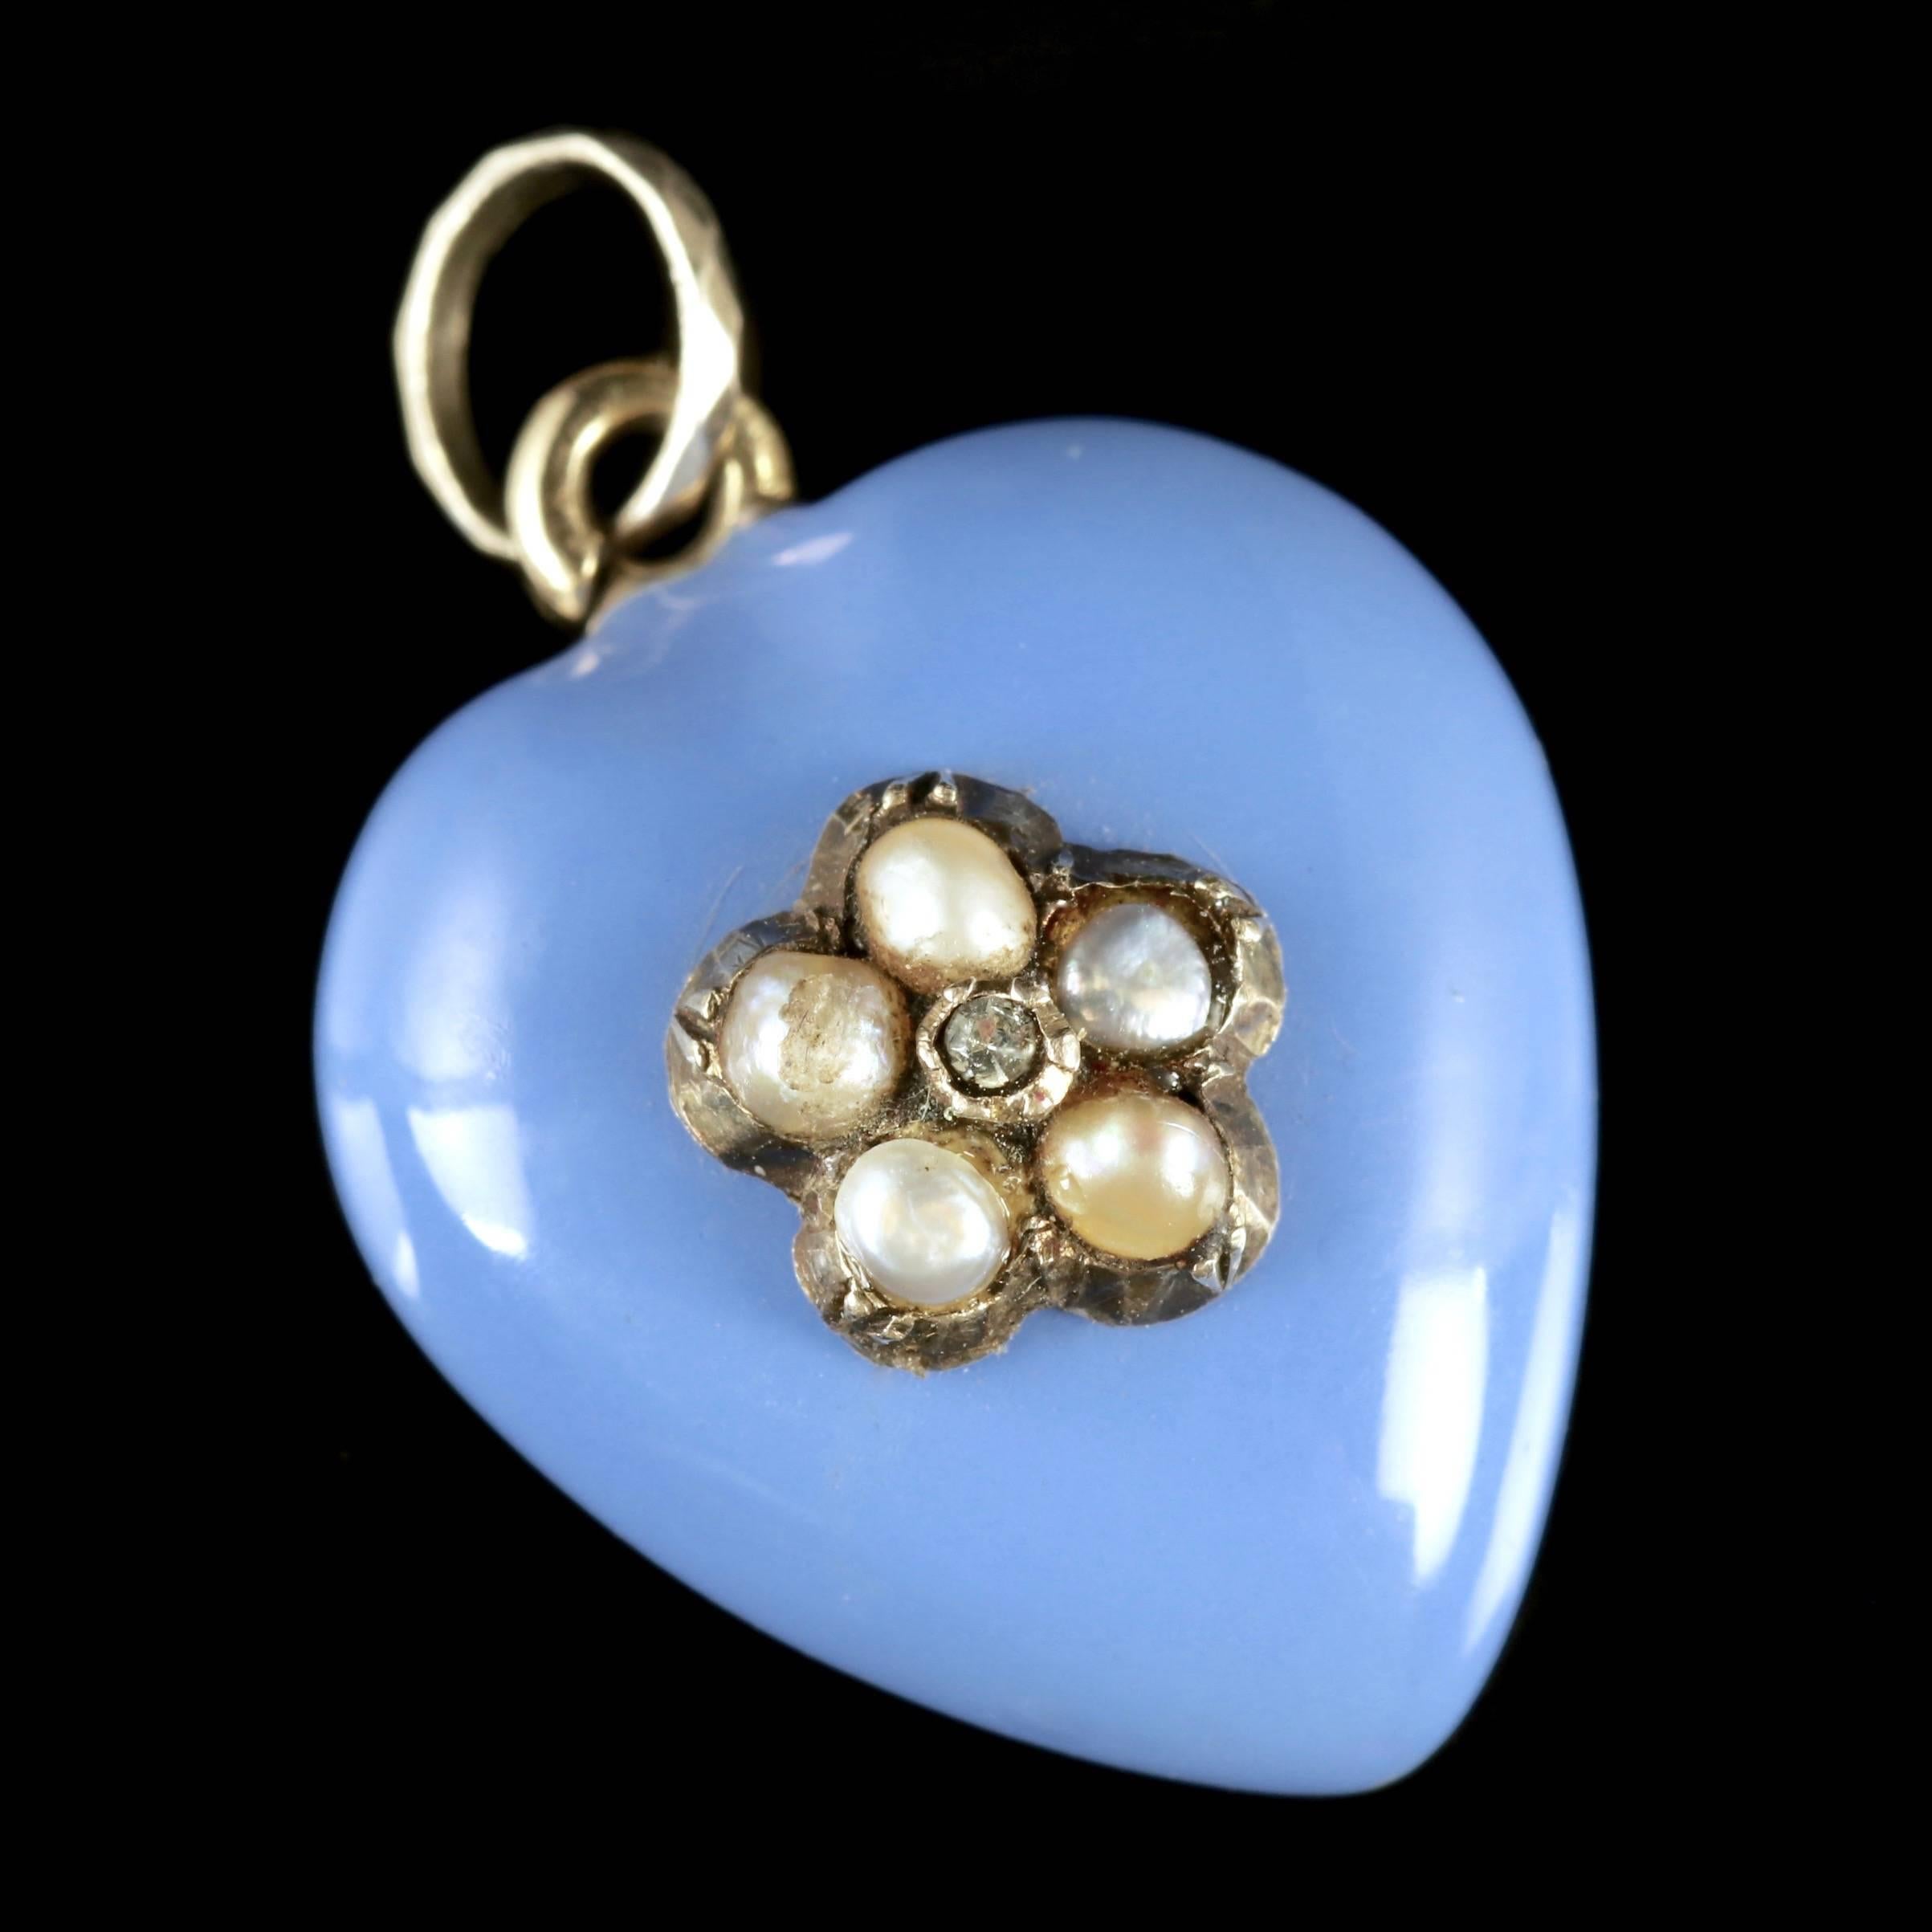 This fabulous Georgian 18ct Gold and Duck egg Blue Enamel locket is Circa 1830.

Due to its age, Georgian jewellery is quite rare, with some pieces almost three hundred years old. From 1714 until 1837 four King Georges and a short-lived William gave